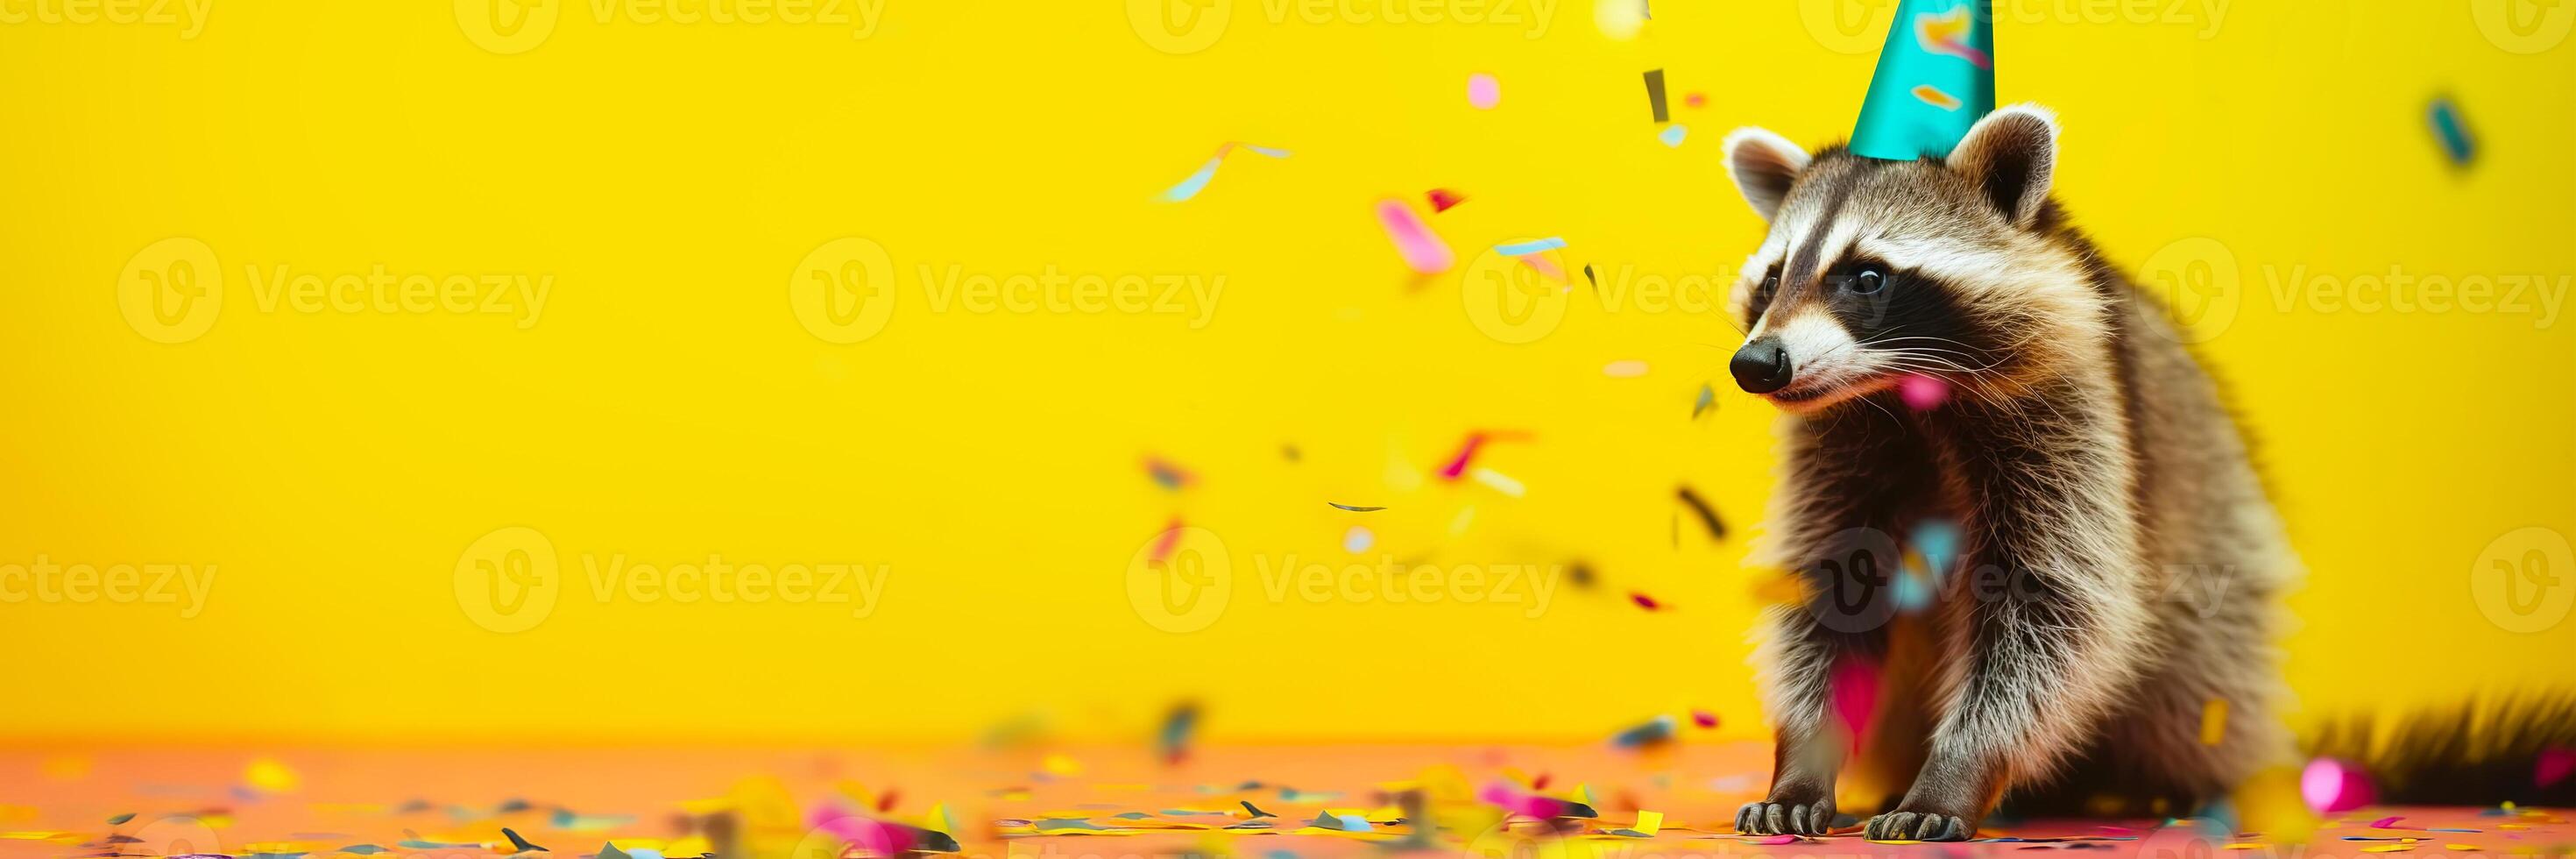 Banner with Funny raccoon in turquoise cap dances in confetti on yellow background. Festive party concept. photo